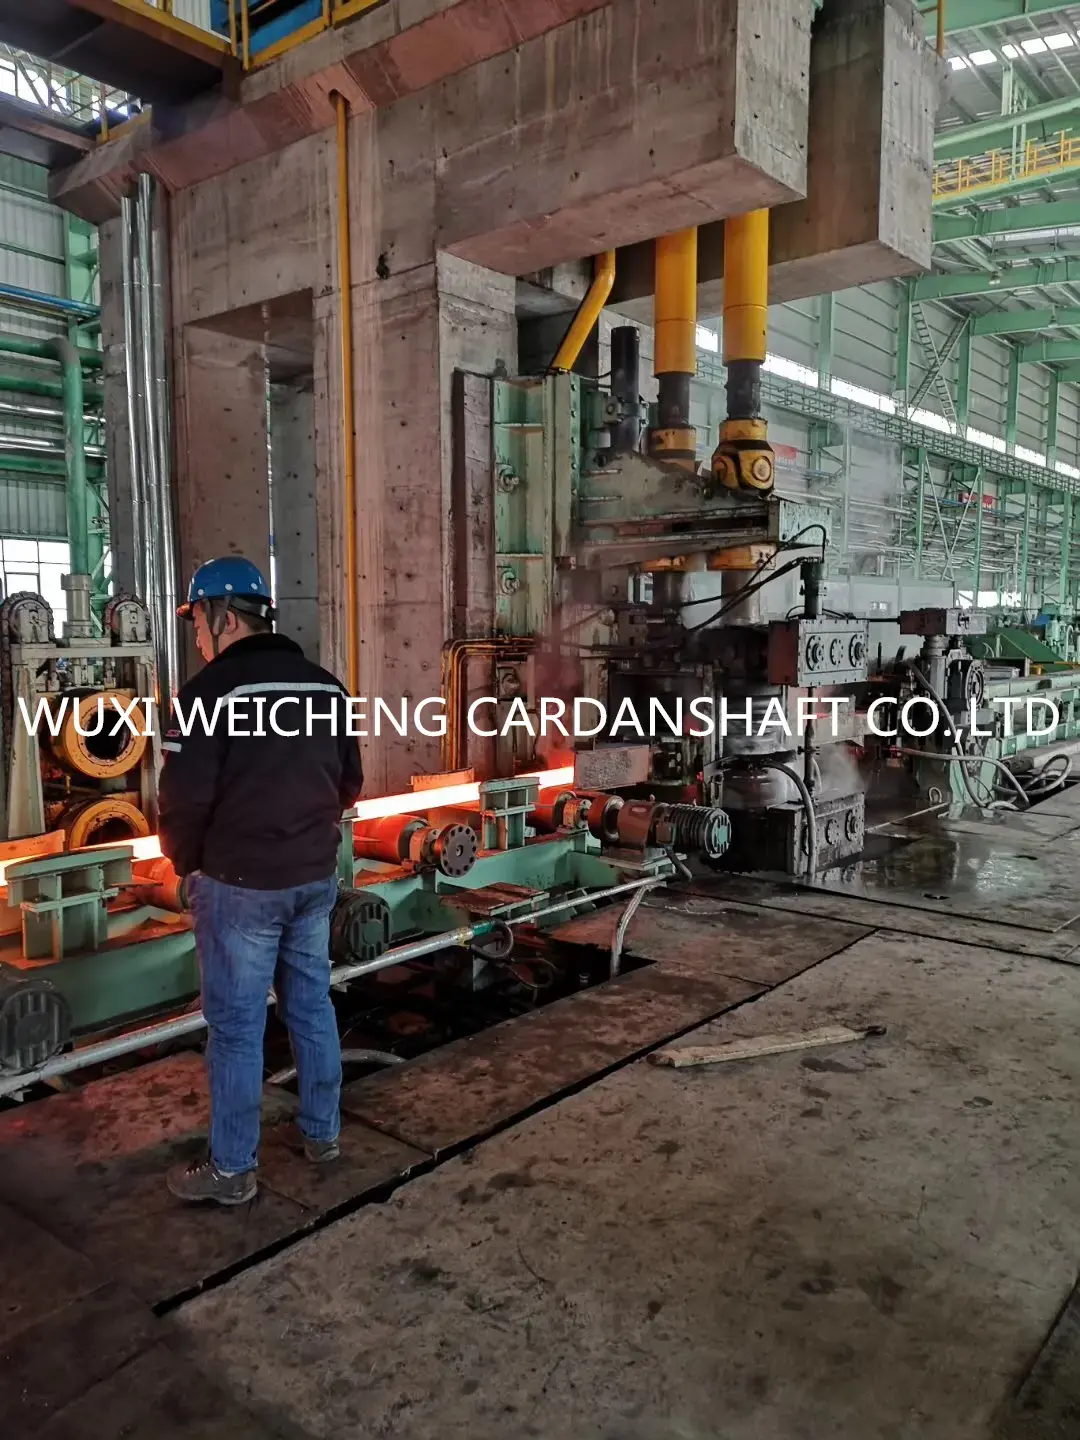 WEICHENG CARDANSHAFT engineers provide technical support to master technical data